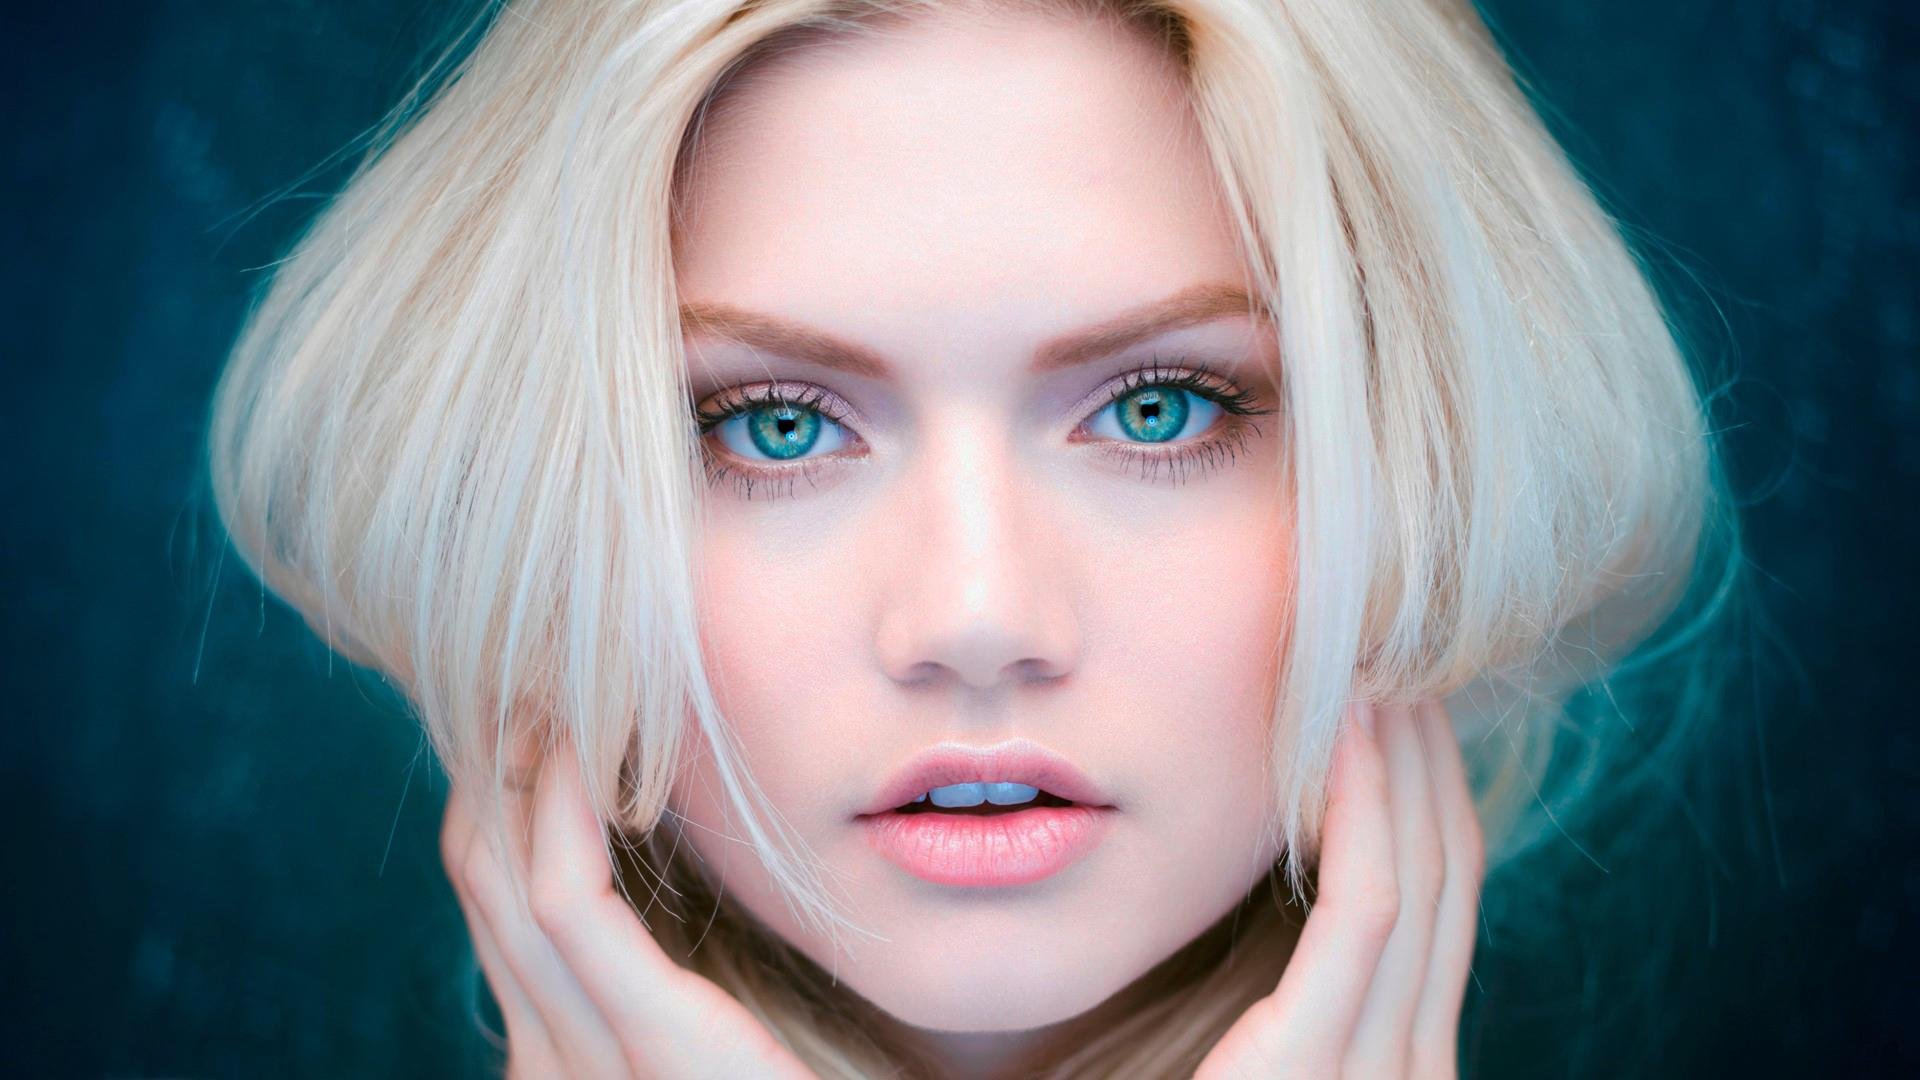 4. "Stunning Hair Colors for Blue-Eyed Beauties" - wide 7